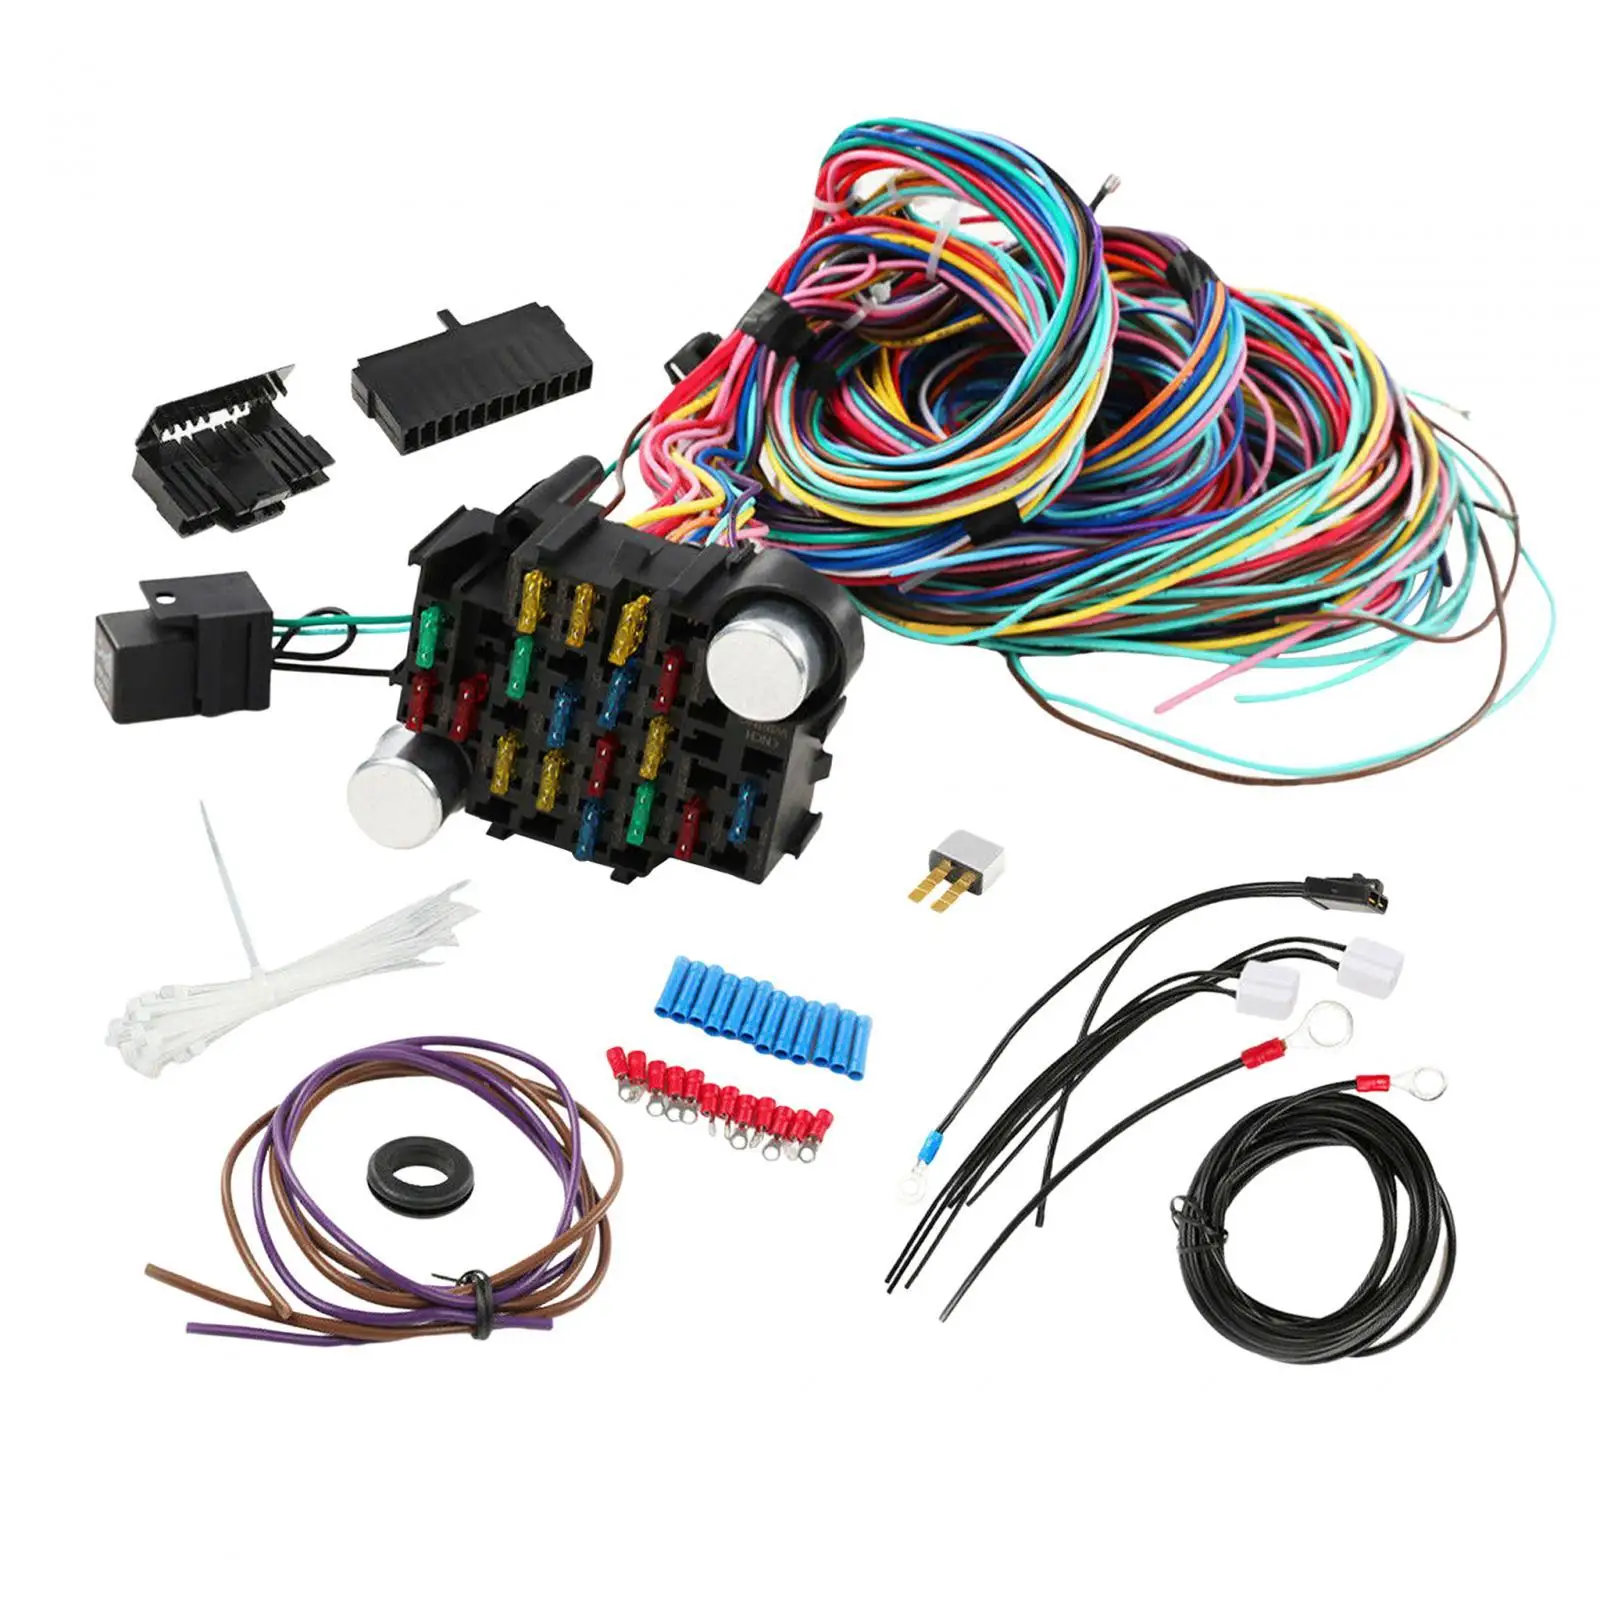 Universal Wiring Harness Kit Extra Long Wires Heavy Duty Replacement Spare Parts 21 Circuit Wiring Harness for Automotive